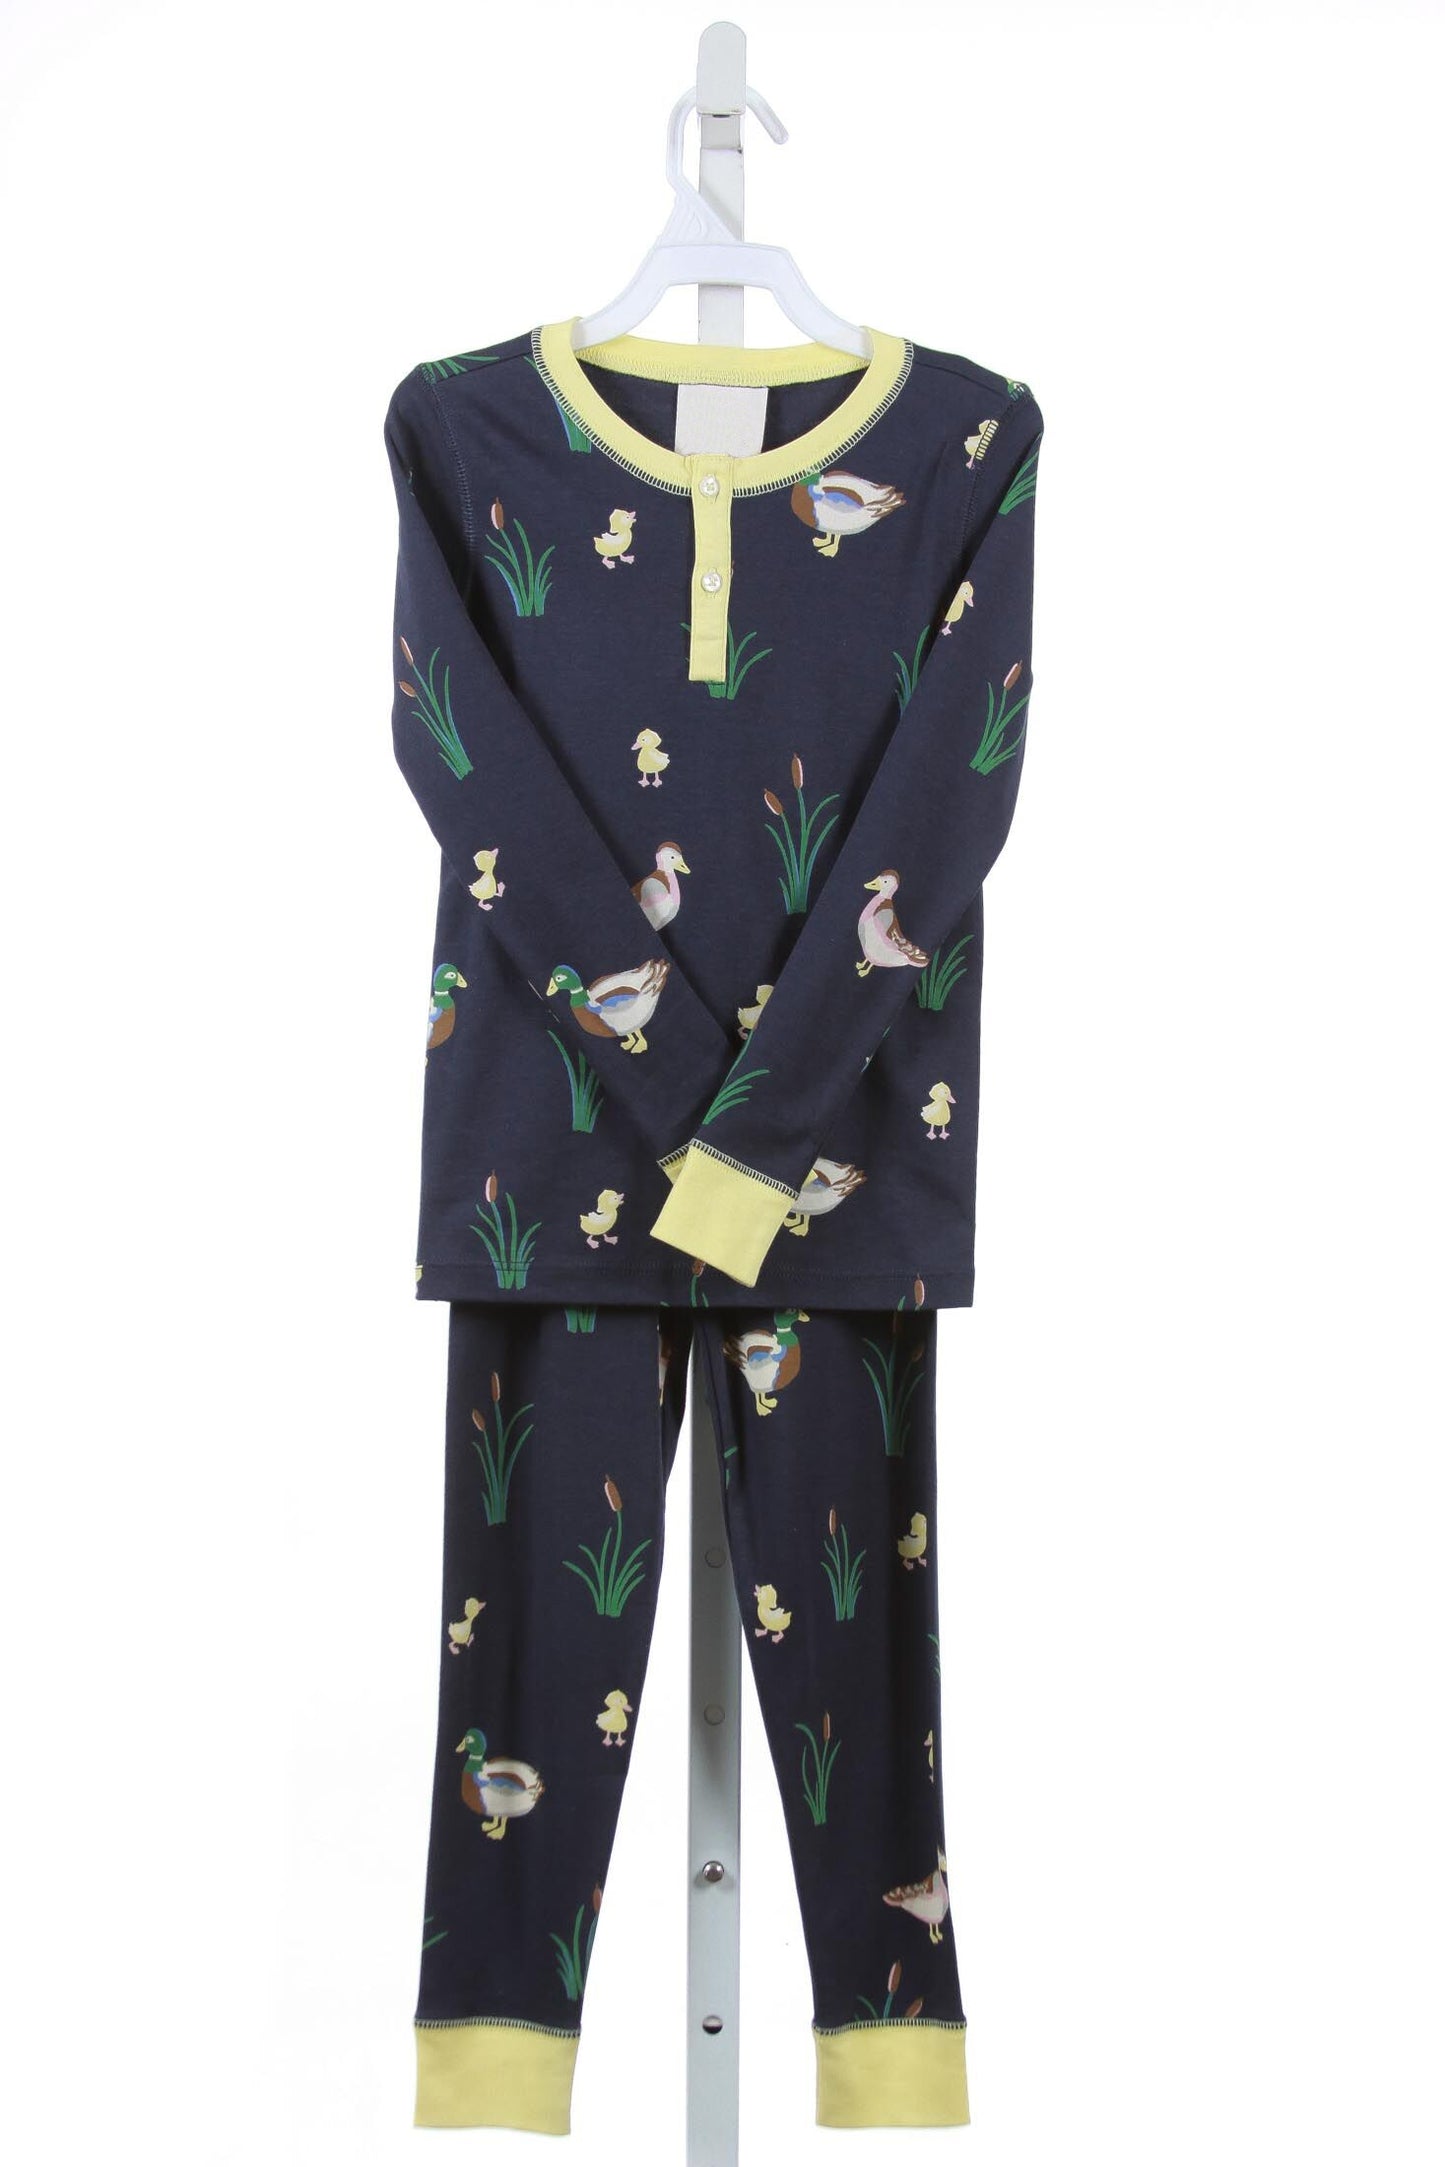 presale BLP0500 Duck yellow trimmed navy blue long-sleeved trousers pajama set